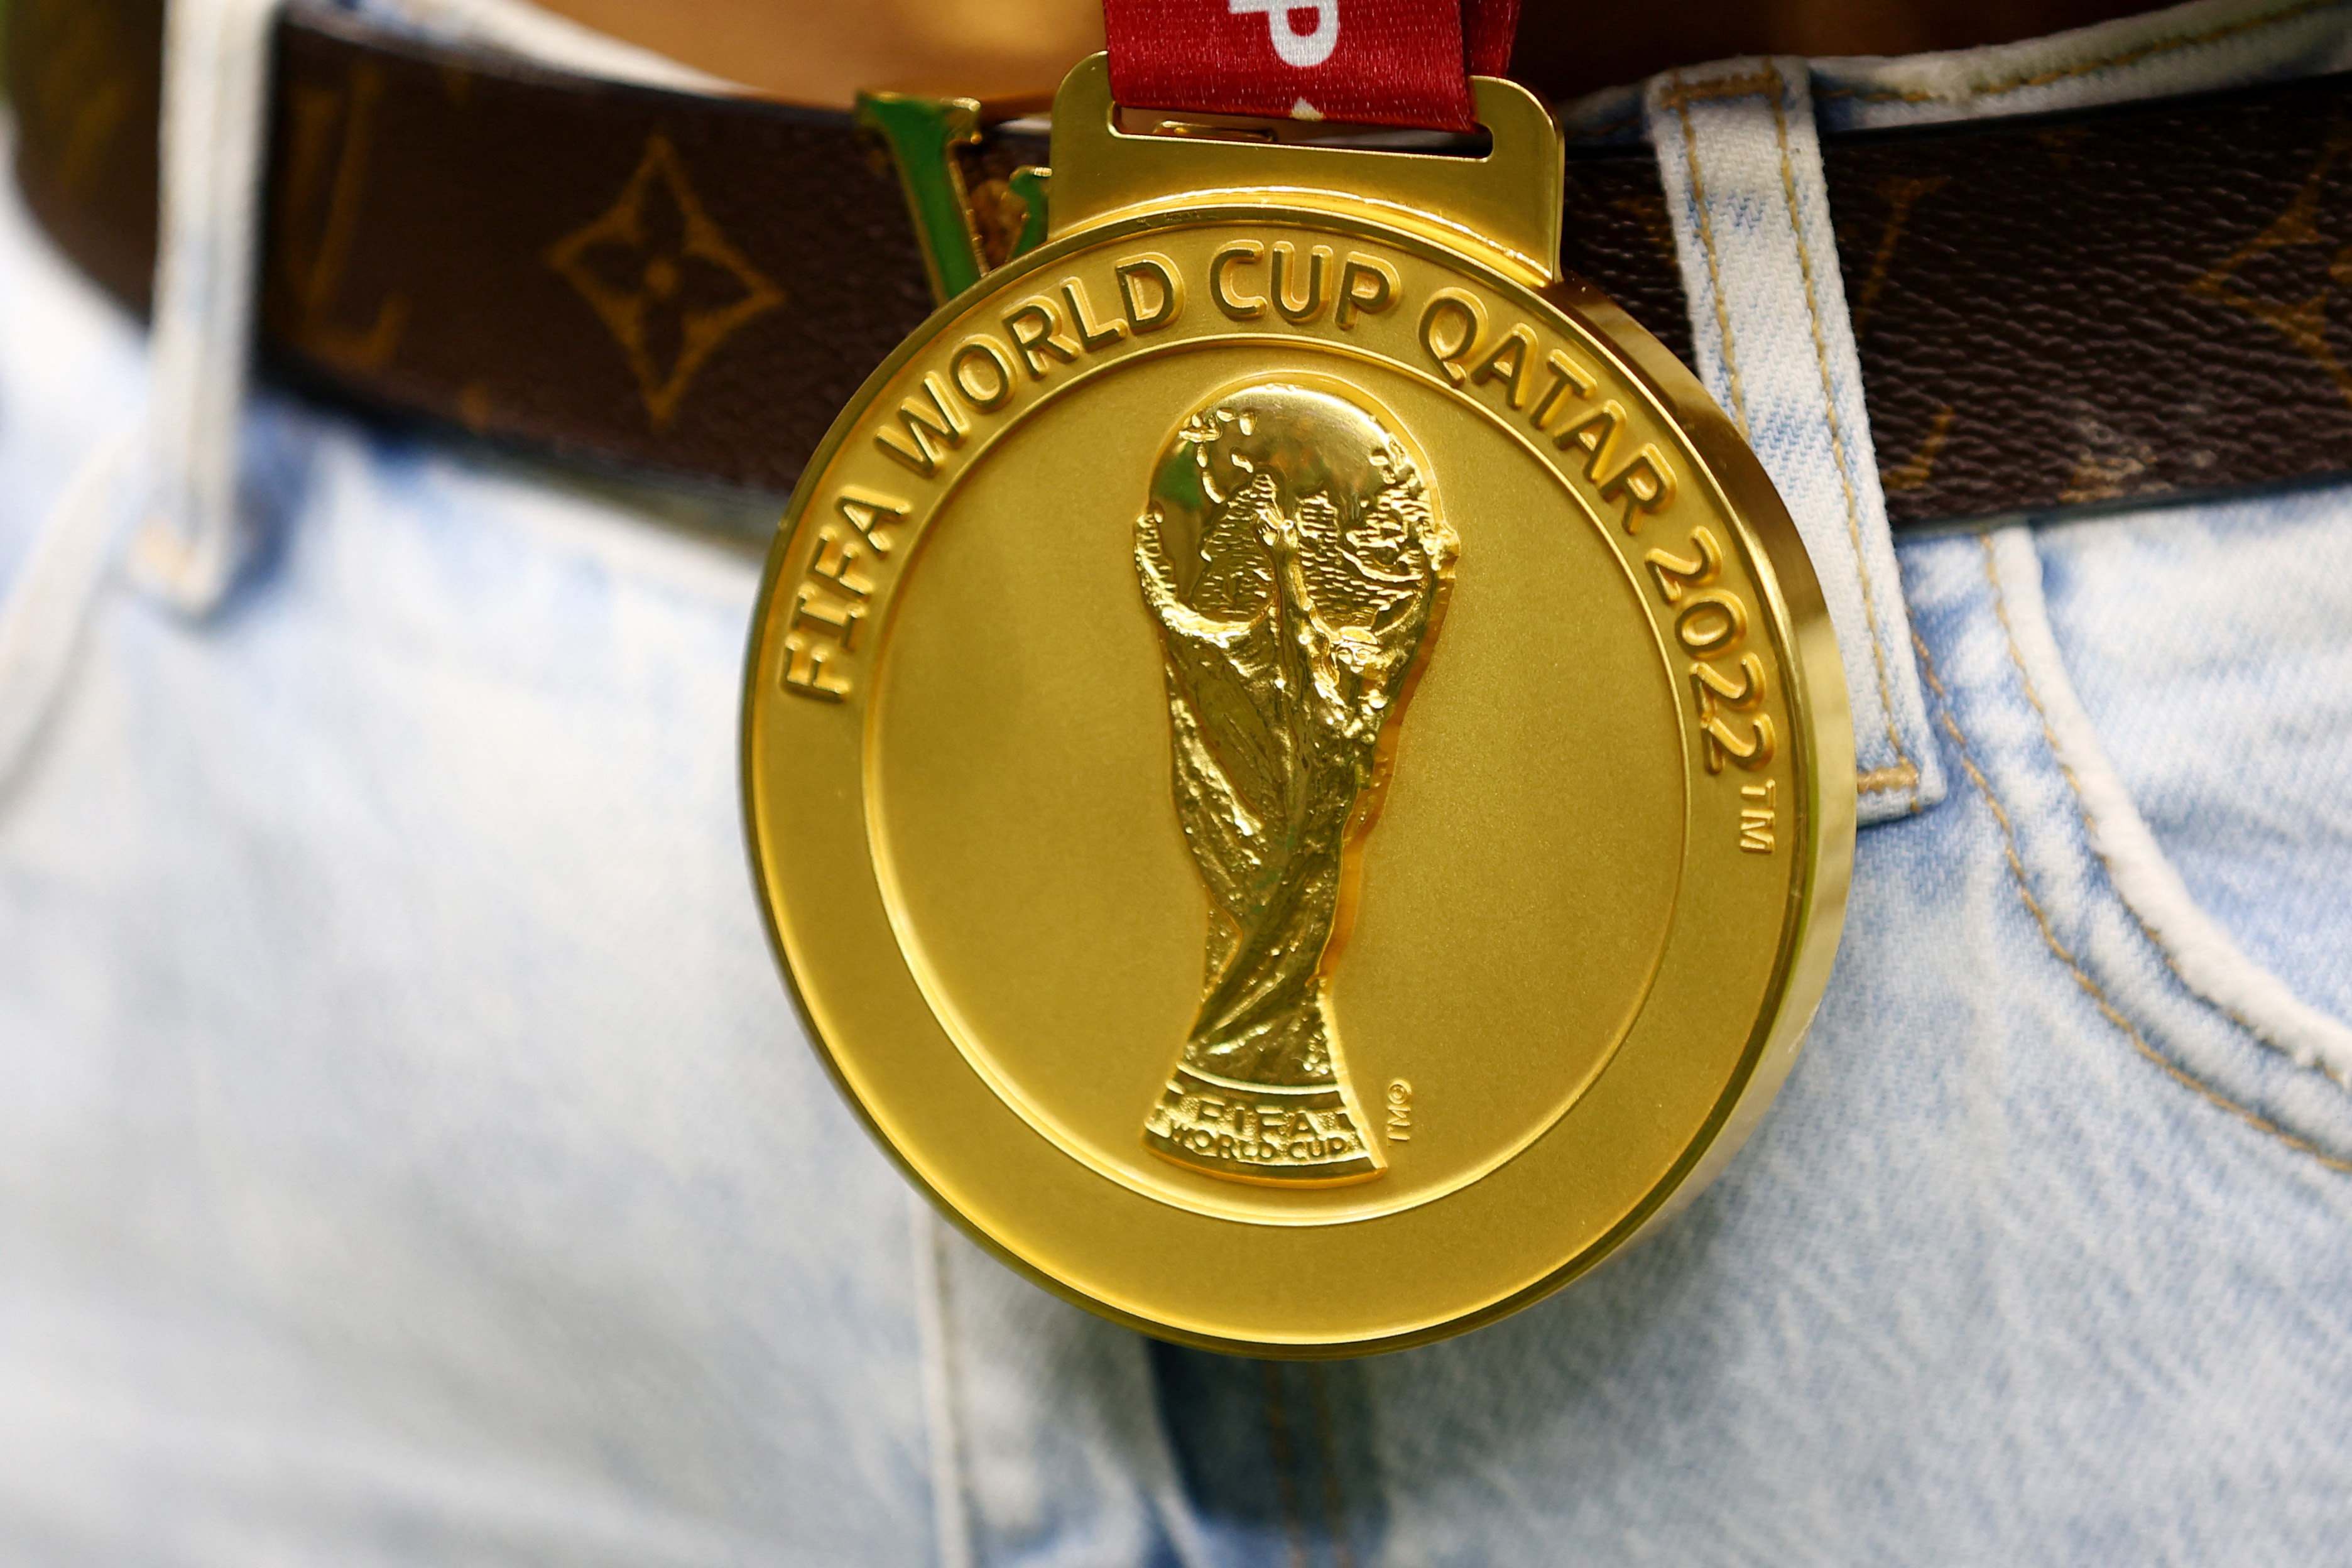 Close up of a FIFA World Champions Badge as seen on the Spanish